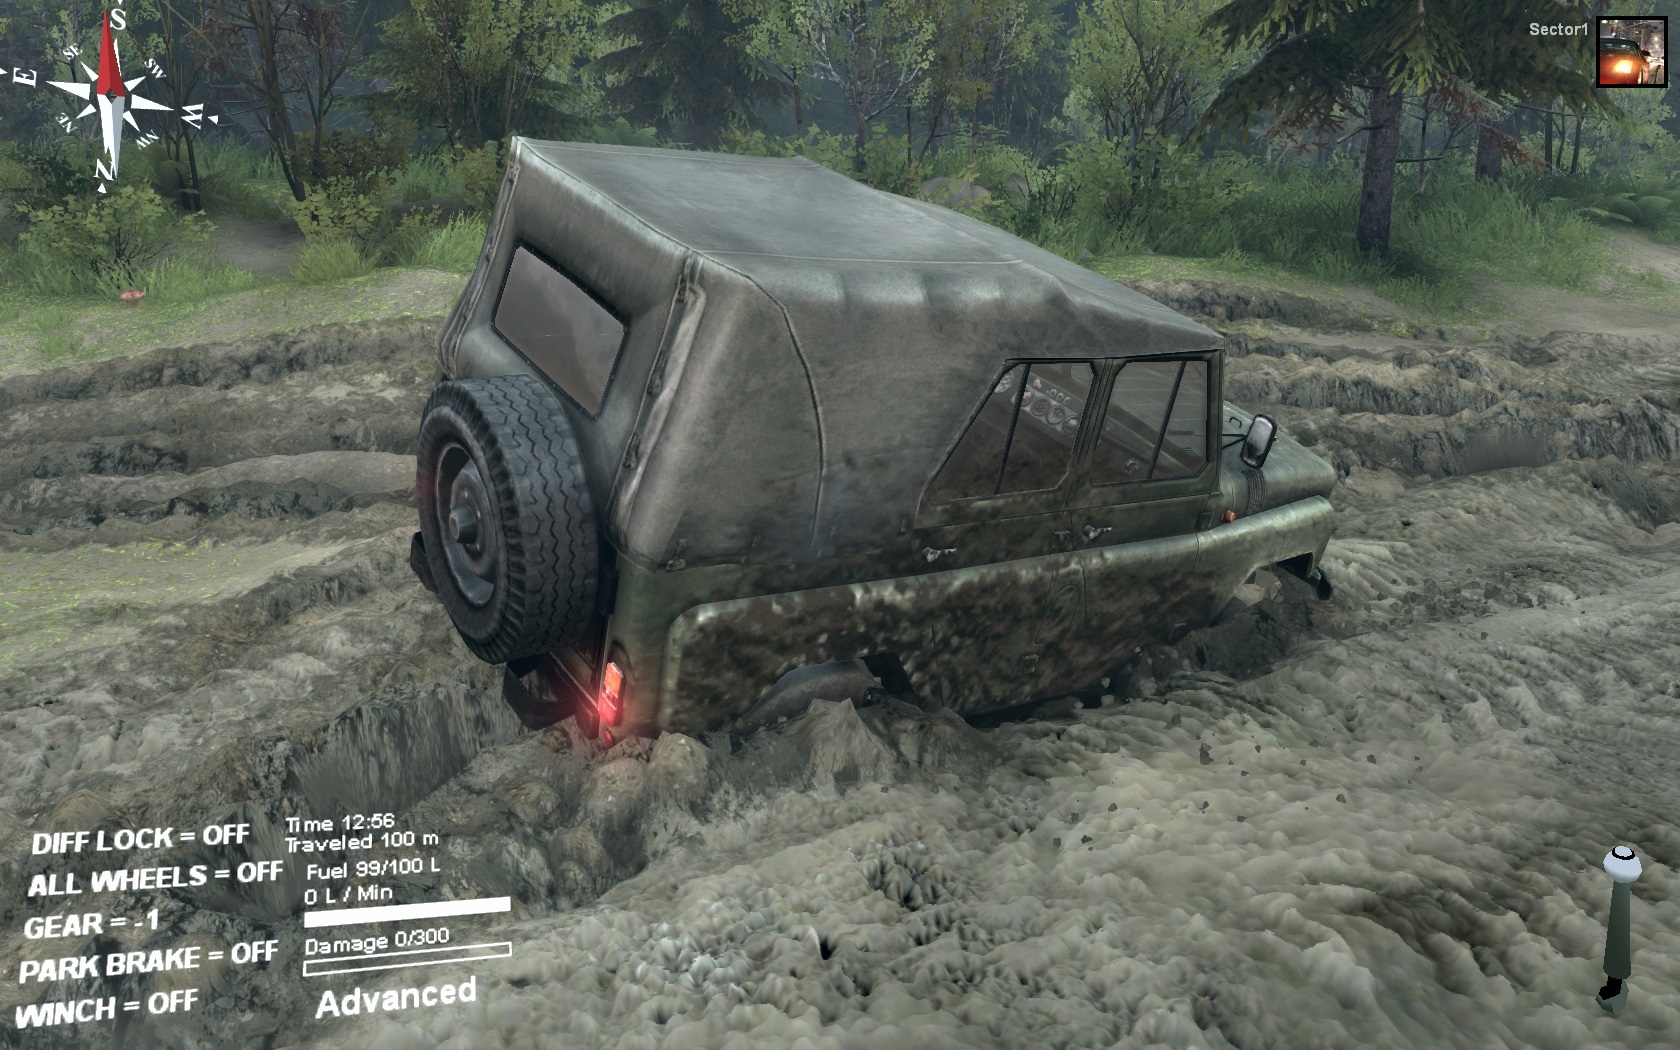 Spintires 